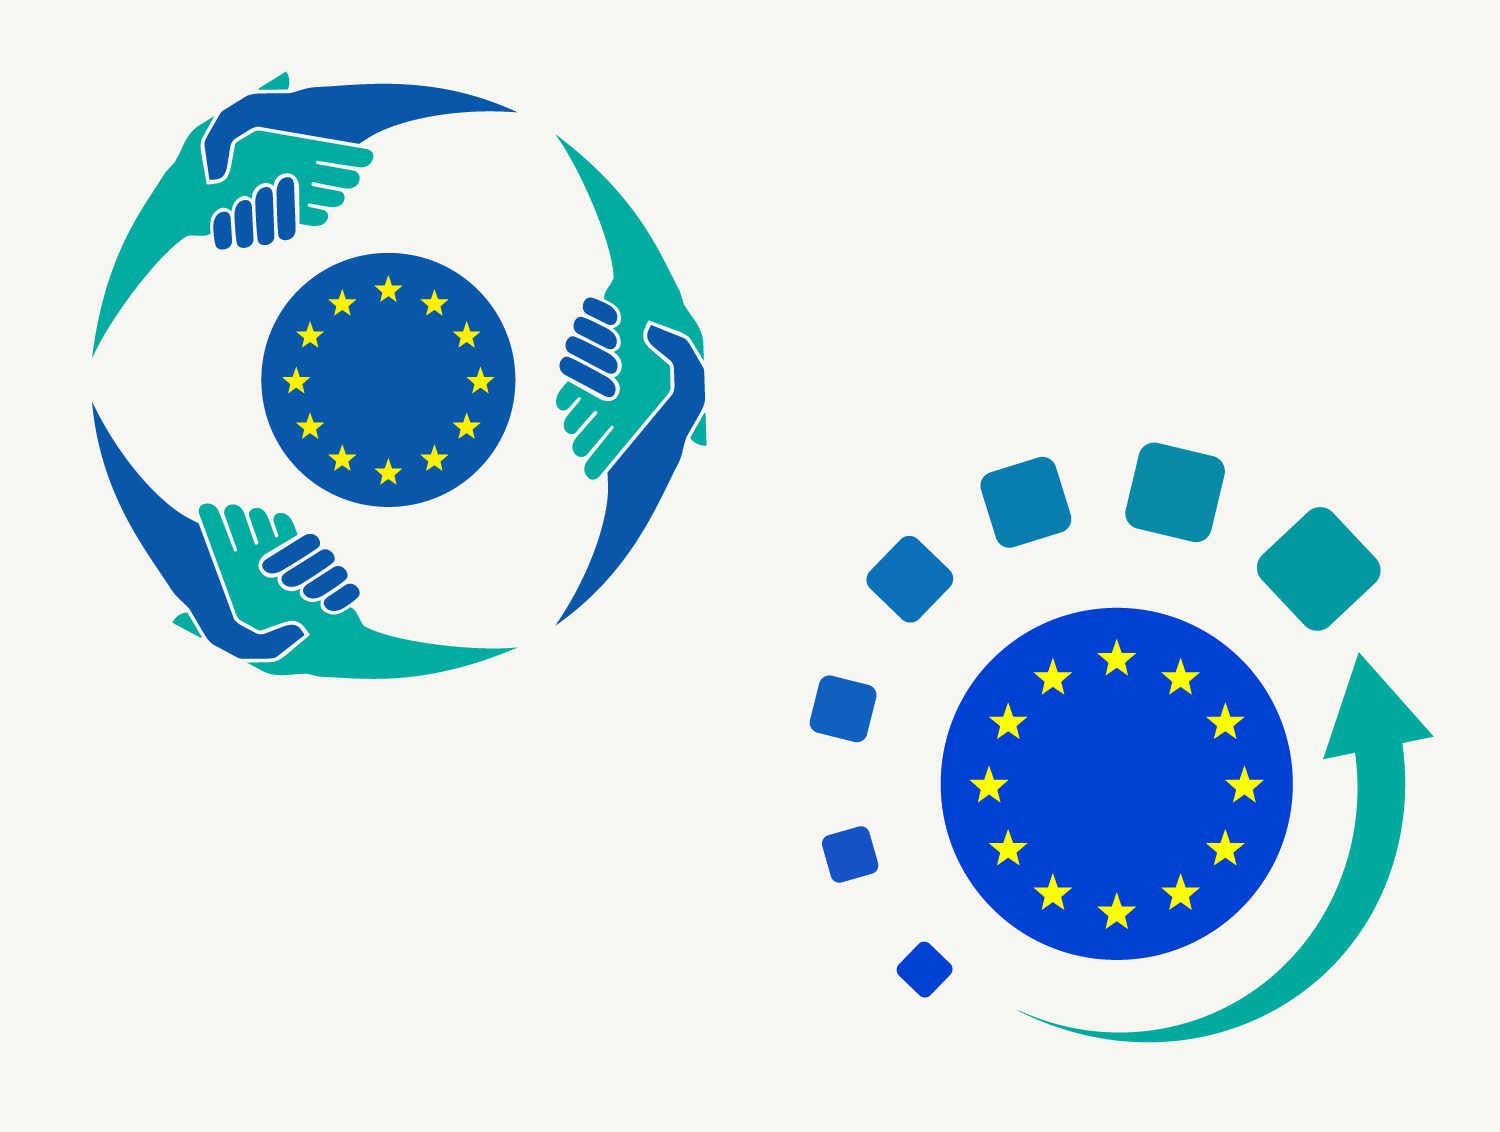 Common logos to identify trusted EU data intermediaries and data altruism organisations